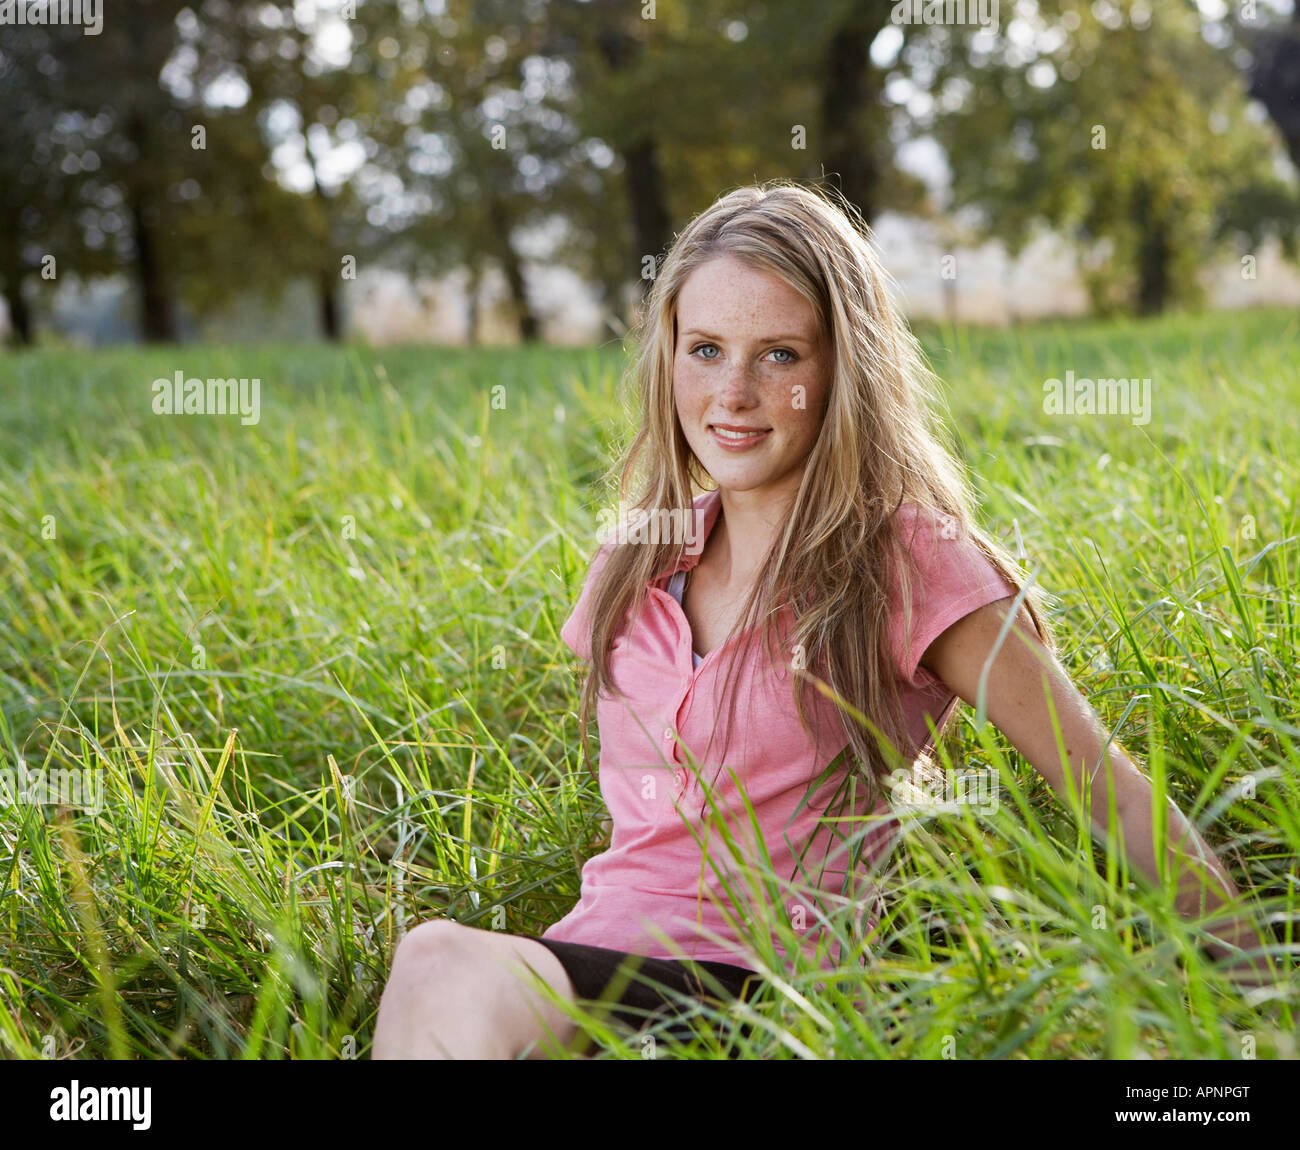 Teenage Girl Sitting in Field Banque D'Images